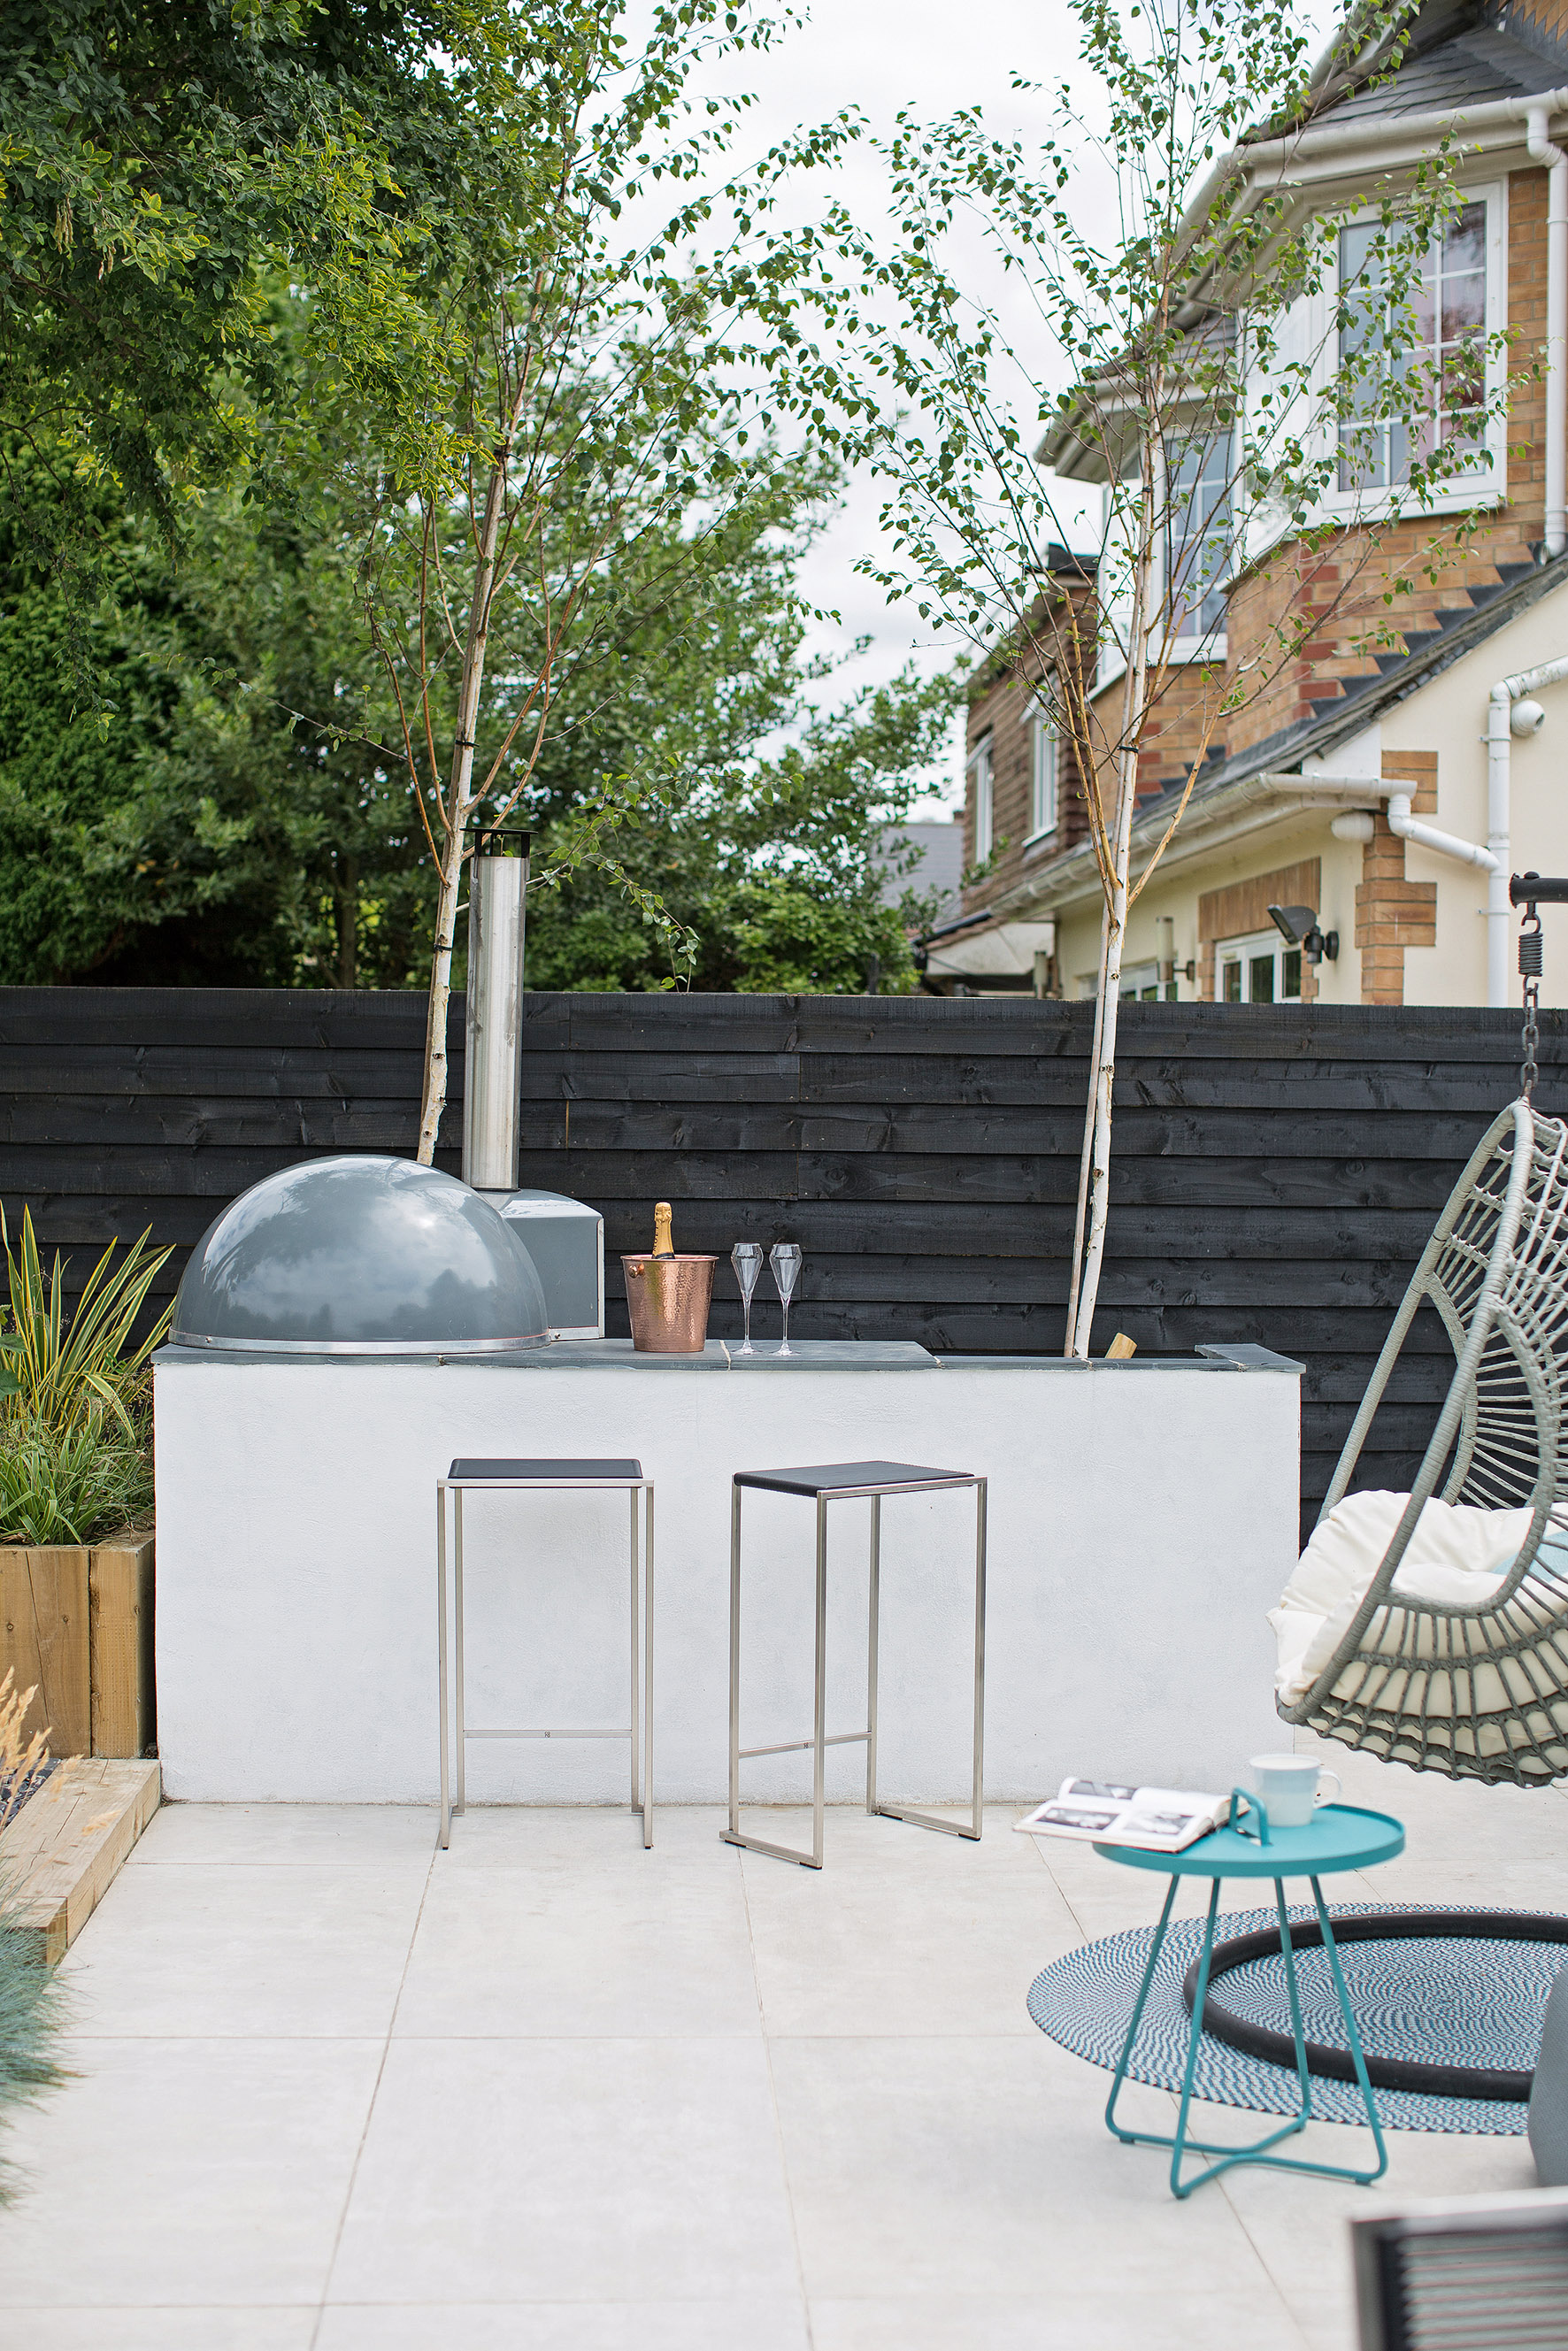 Garden makeover: a large plot transformed into a relaxing, modern space ...